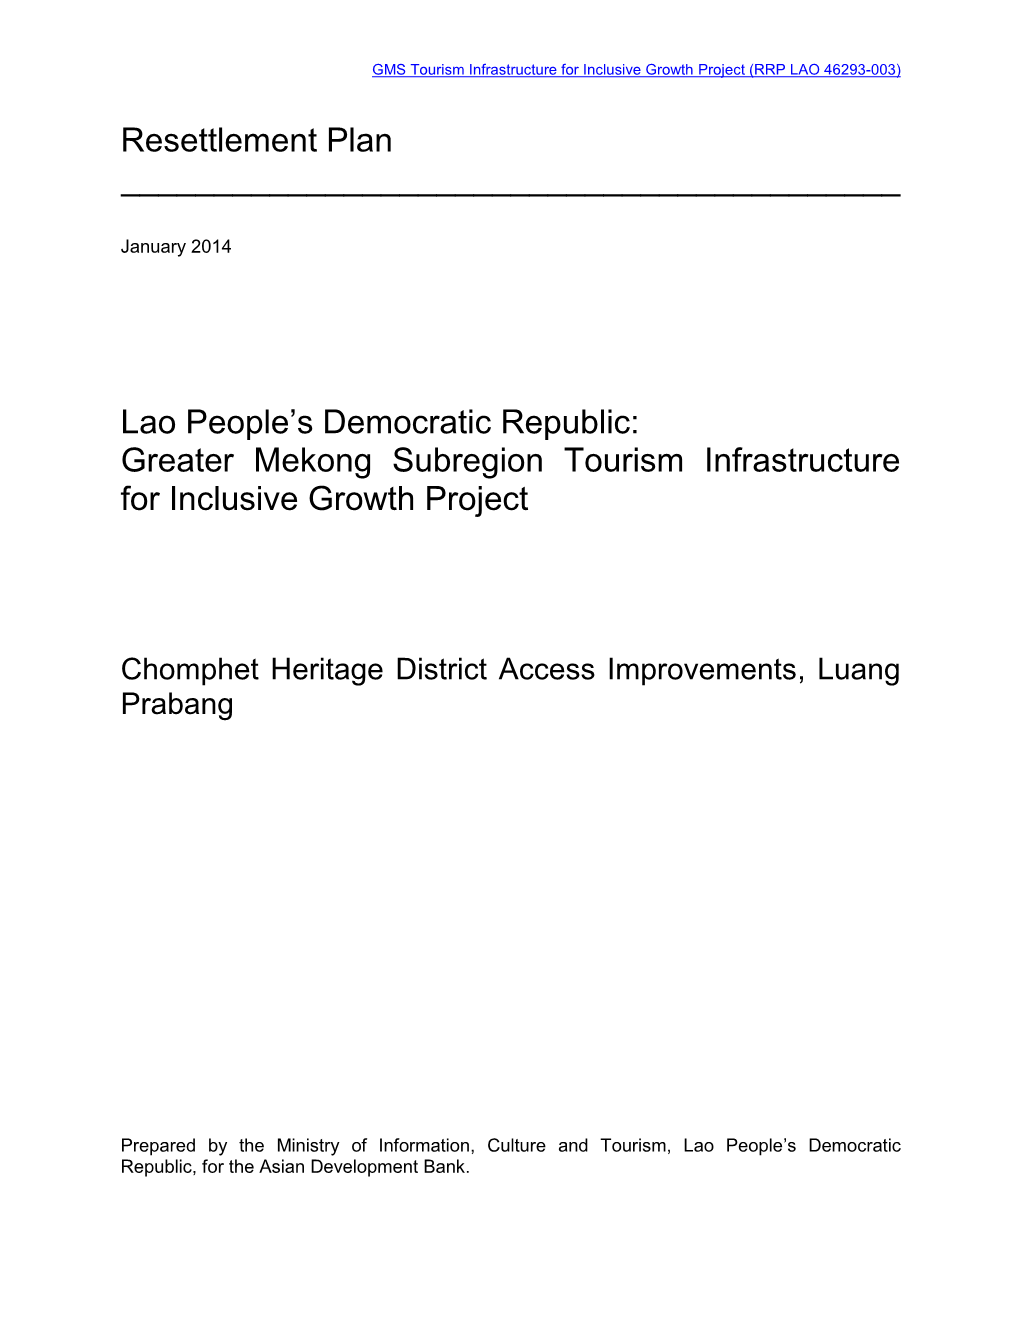 46293-003: Greater Mekong Subregion Tourism Infrastructure For